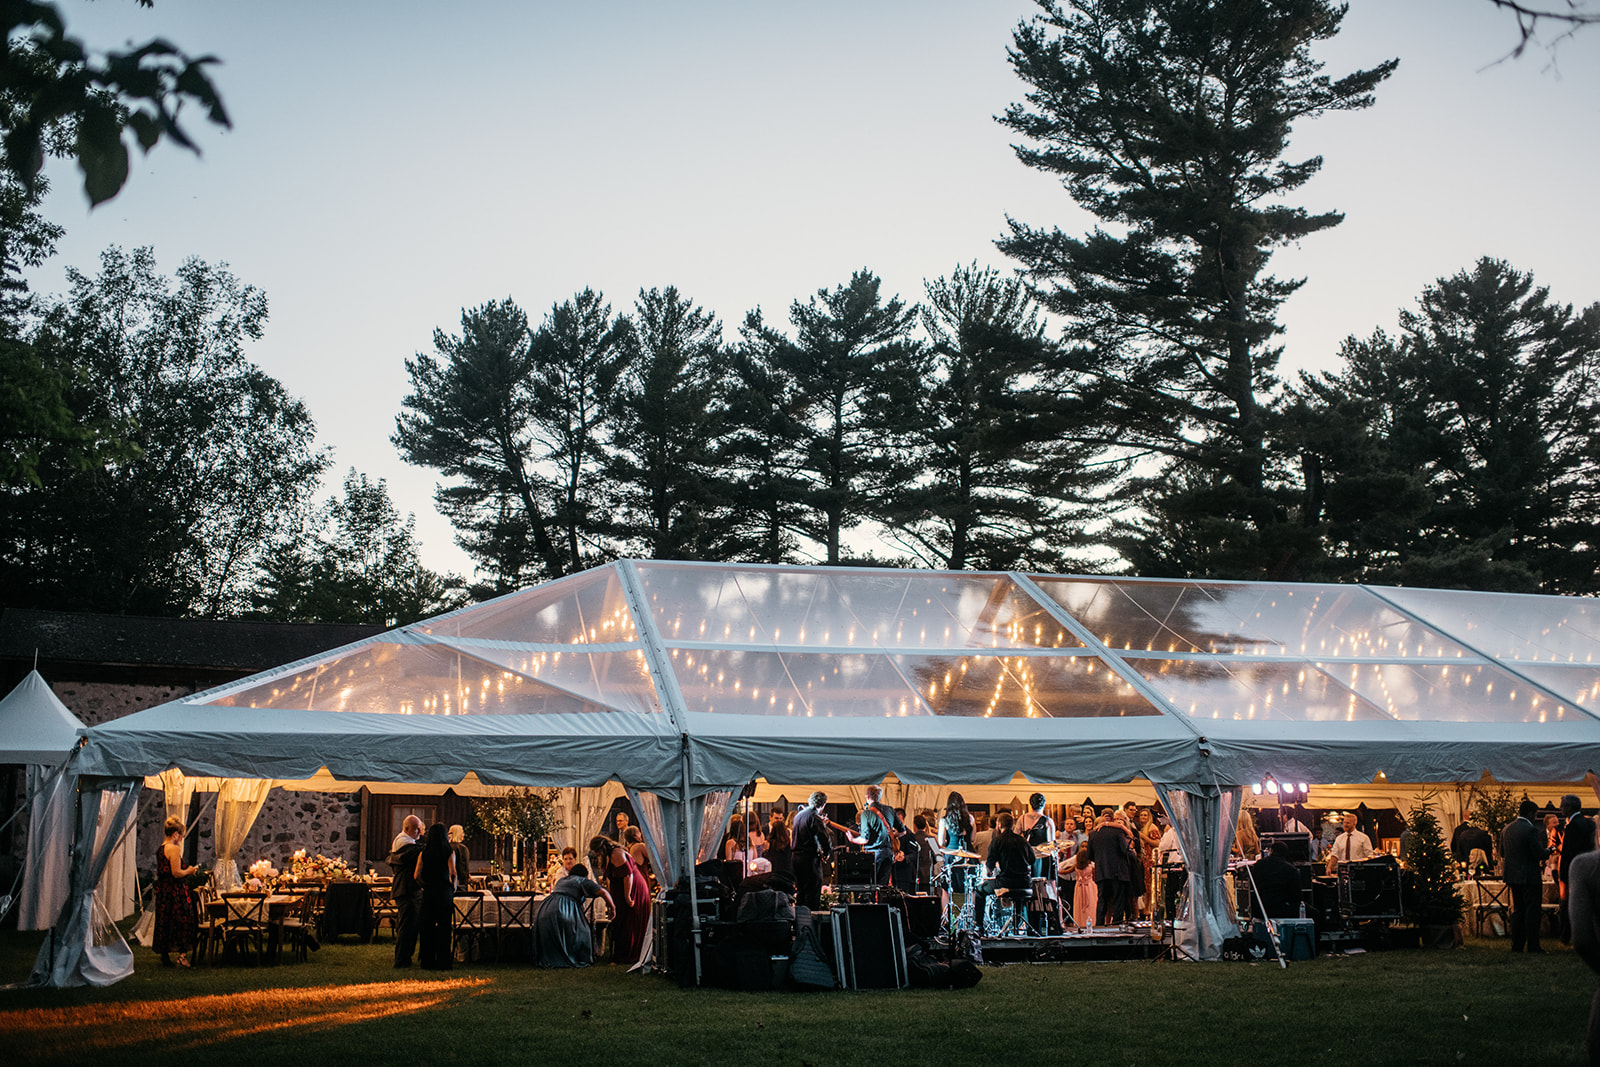 A group of event guests watching a band play under a frame tent with string lights at evening time.